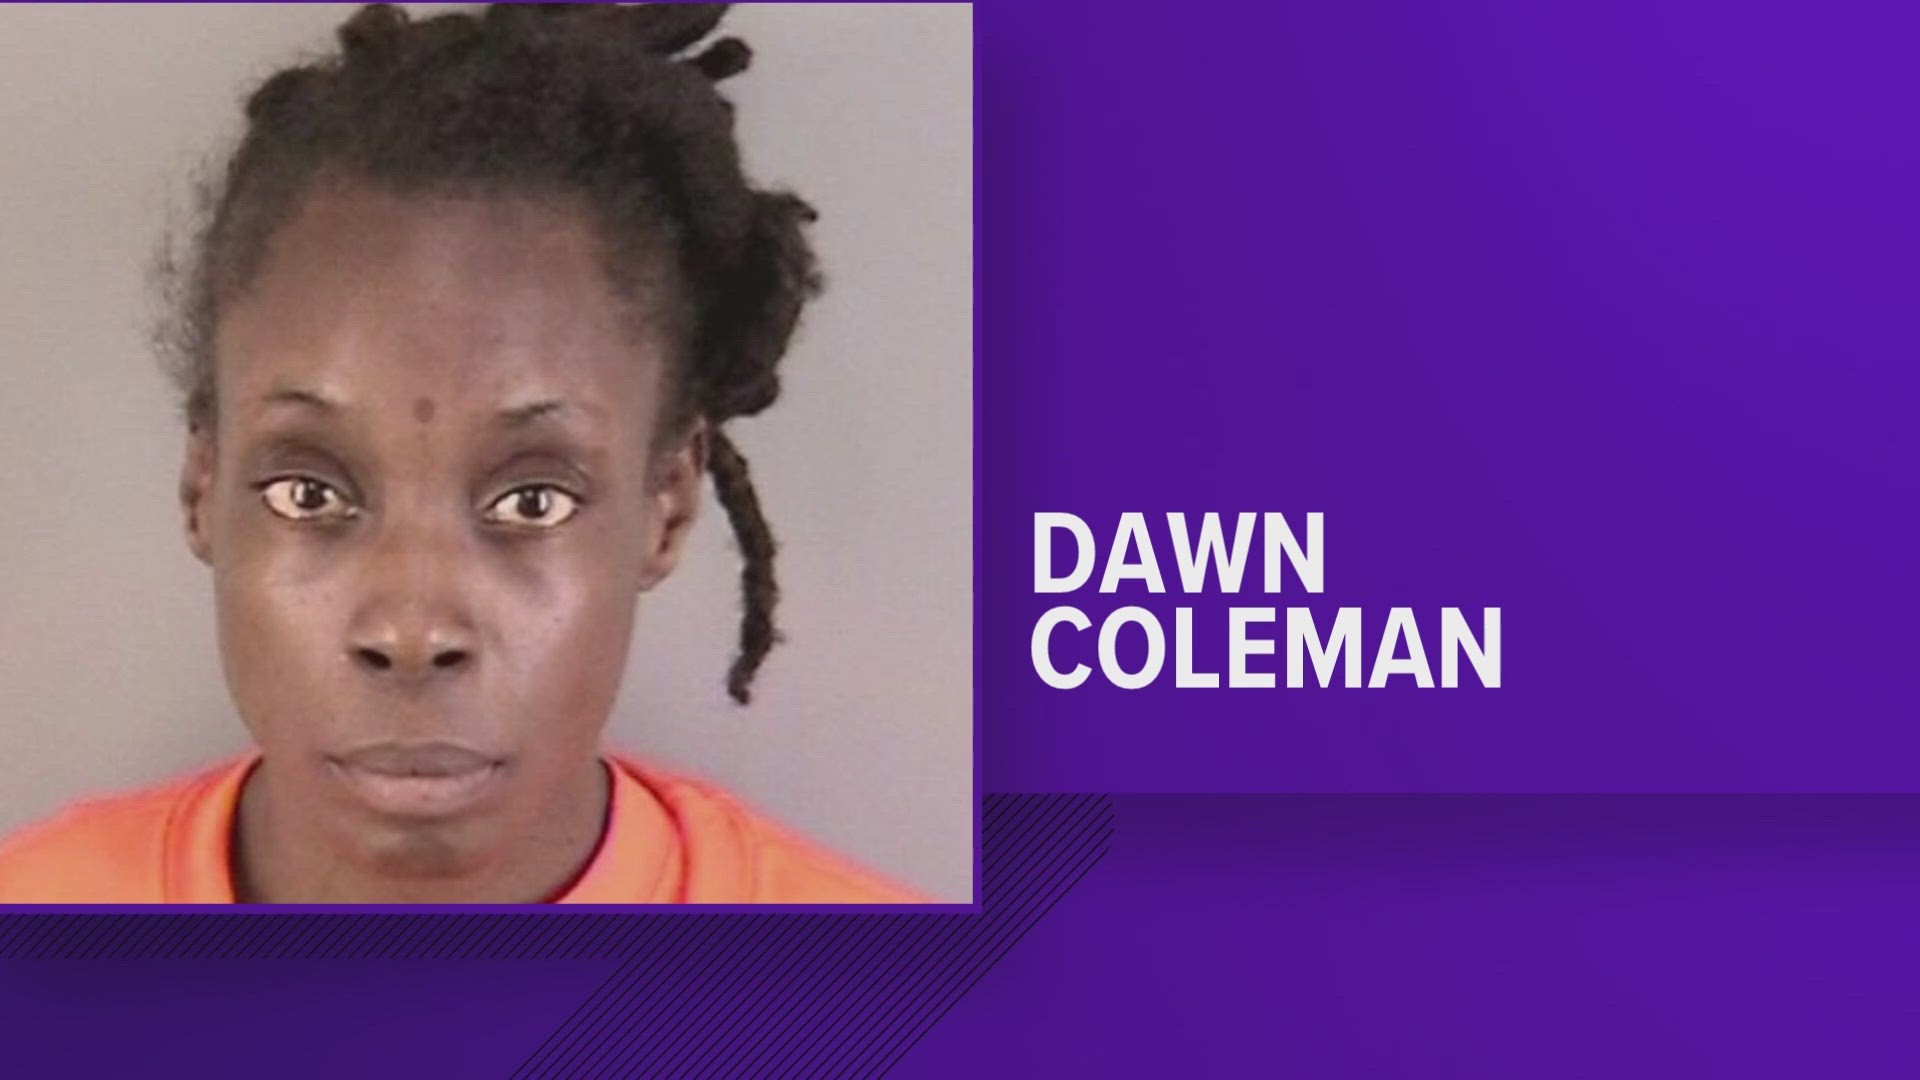 Dawn Coleman is facing multiple charges including neglect of a dependent resulting in death.